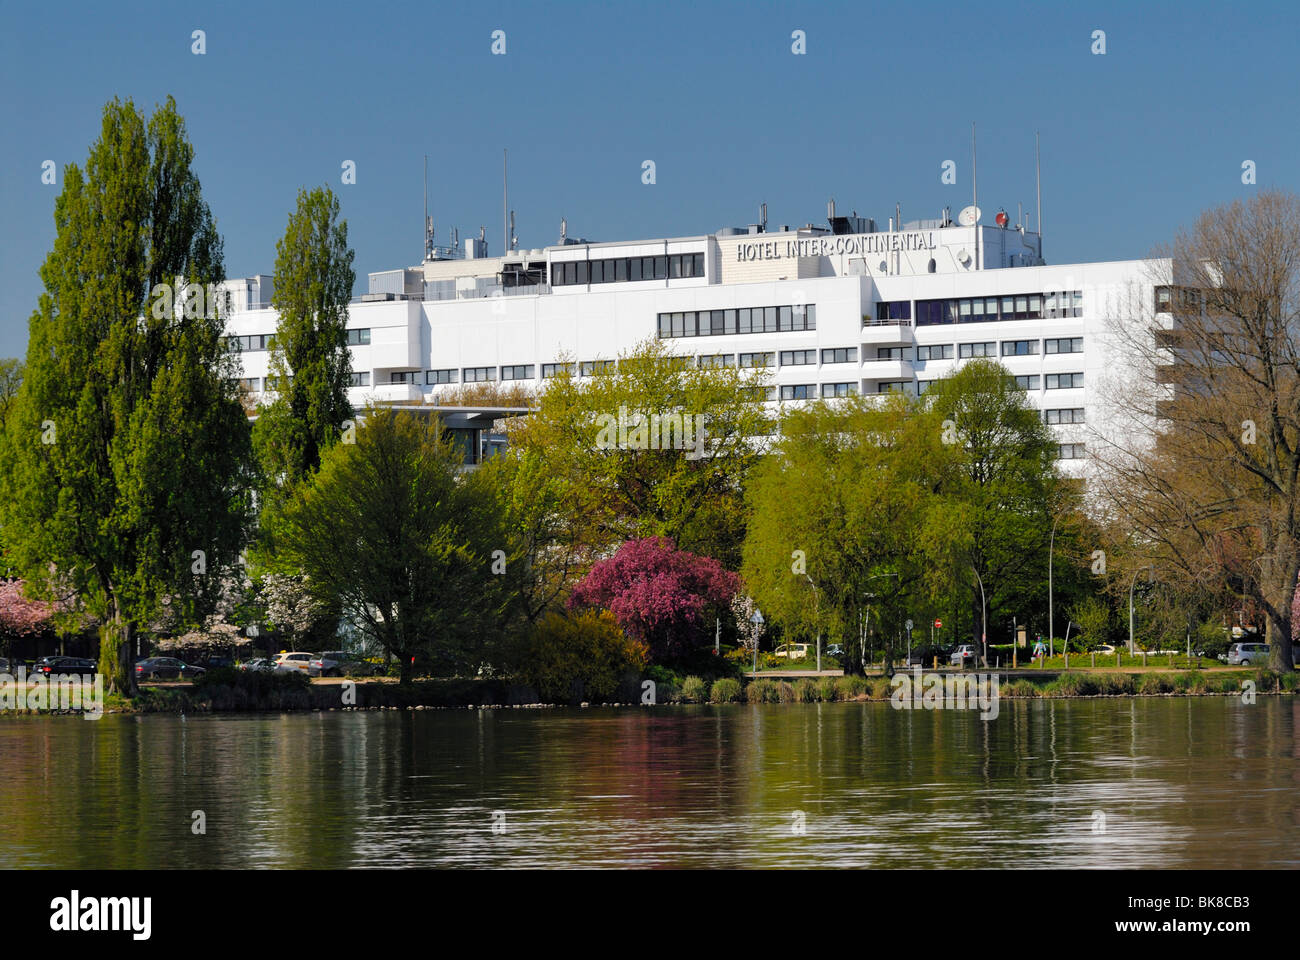 Hotel Intercontinental At The Outer Alster Lake In Hamburg Germany Stock Photo Alamy